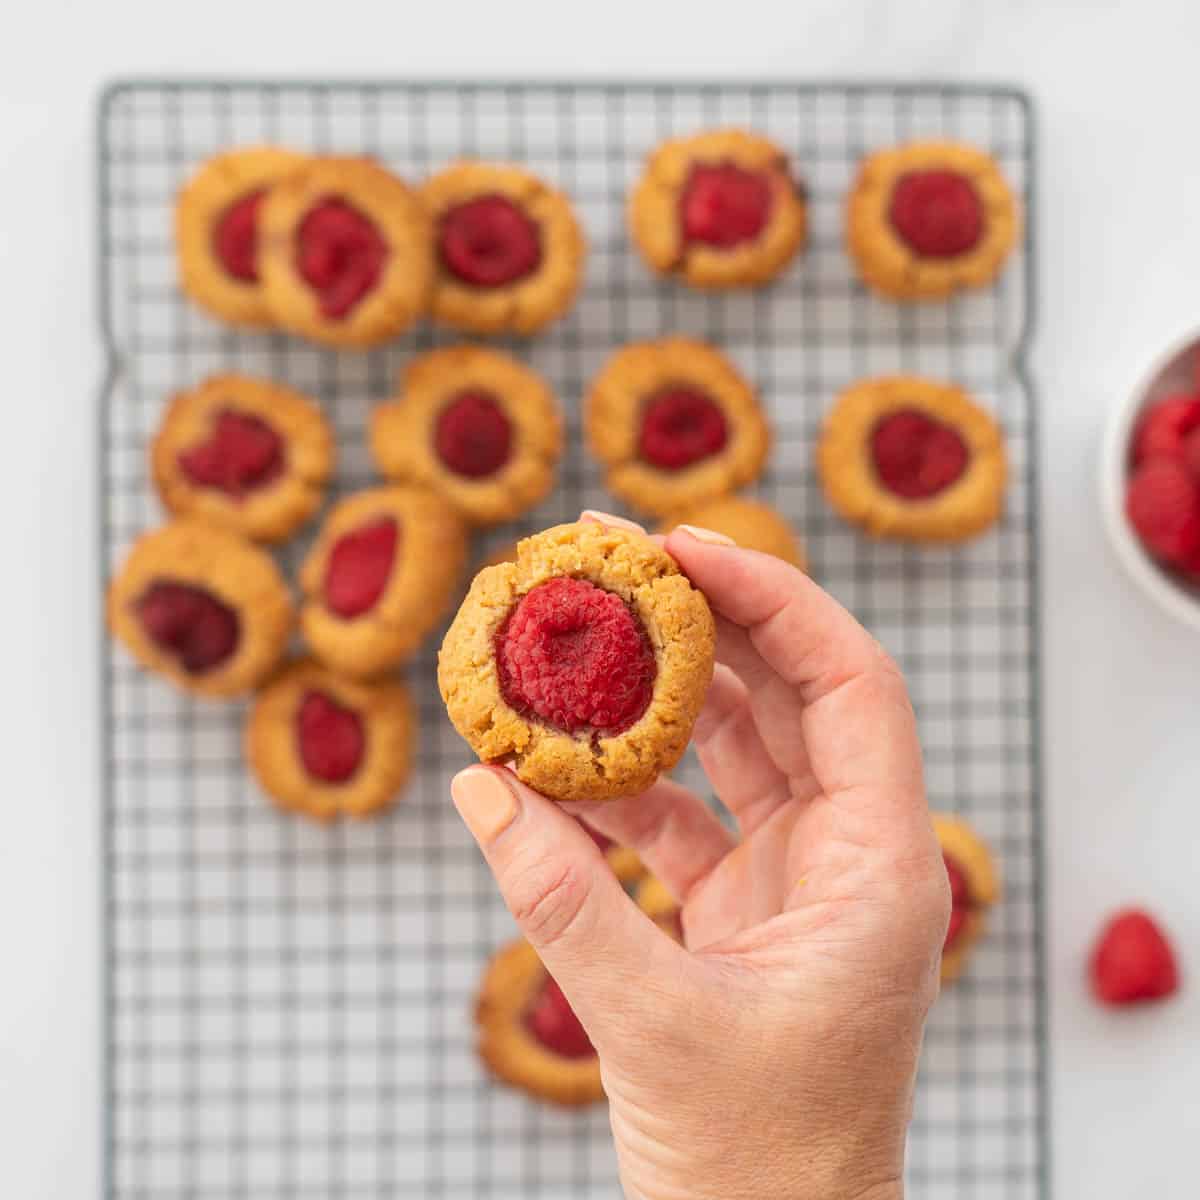 A thumbprint cookie topped with a raspberry being held above a cooling rack of other cookies.